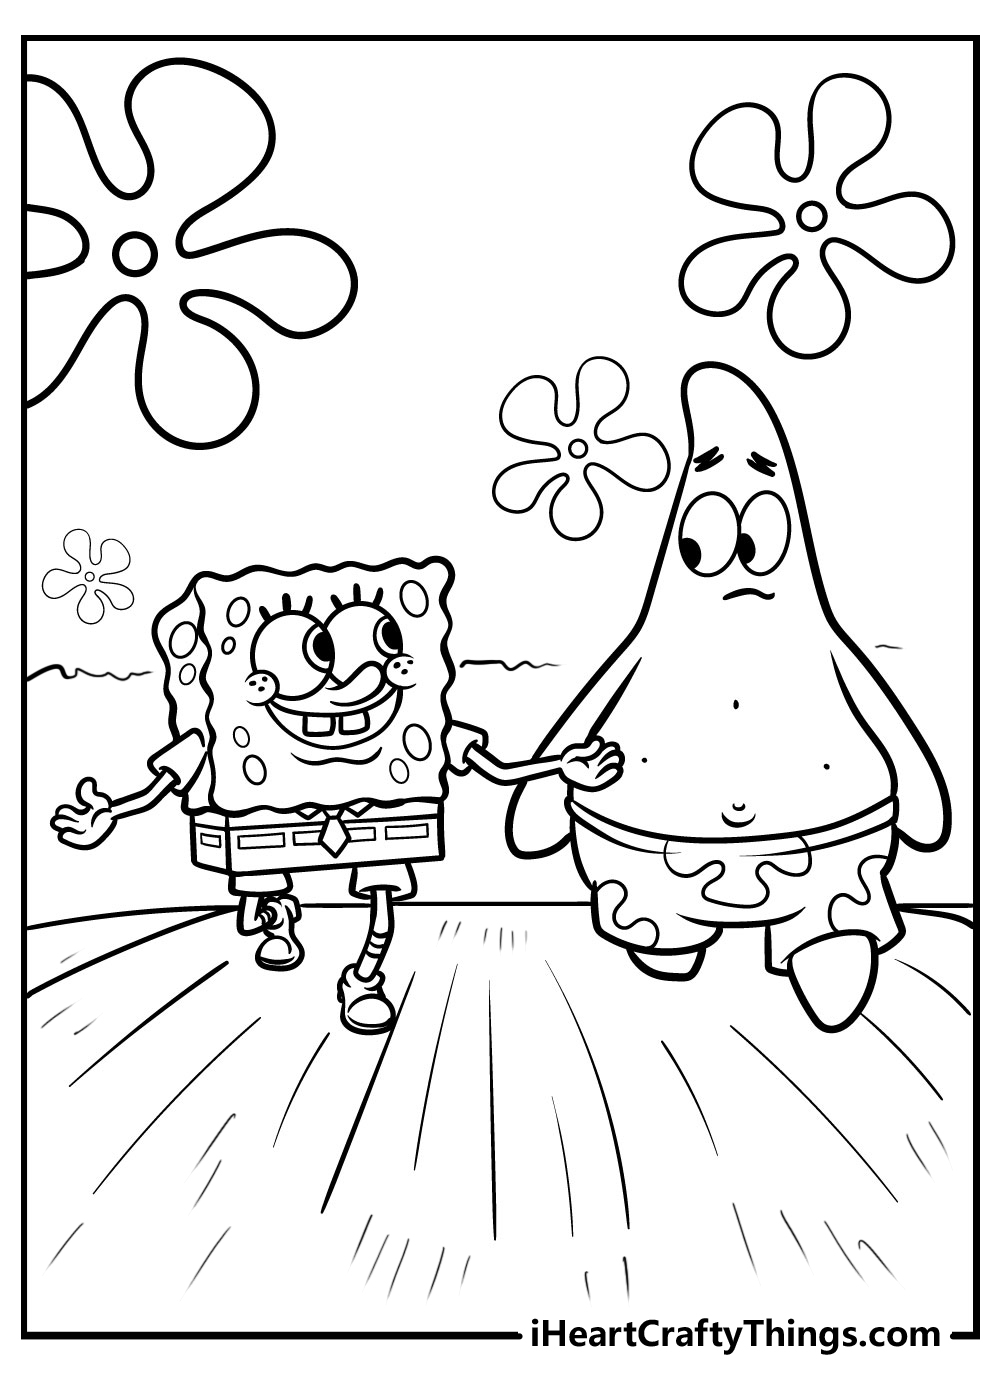 Funny Spongebob Coloring Pages Printables 2